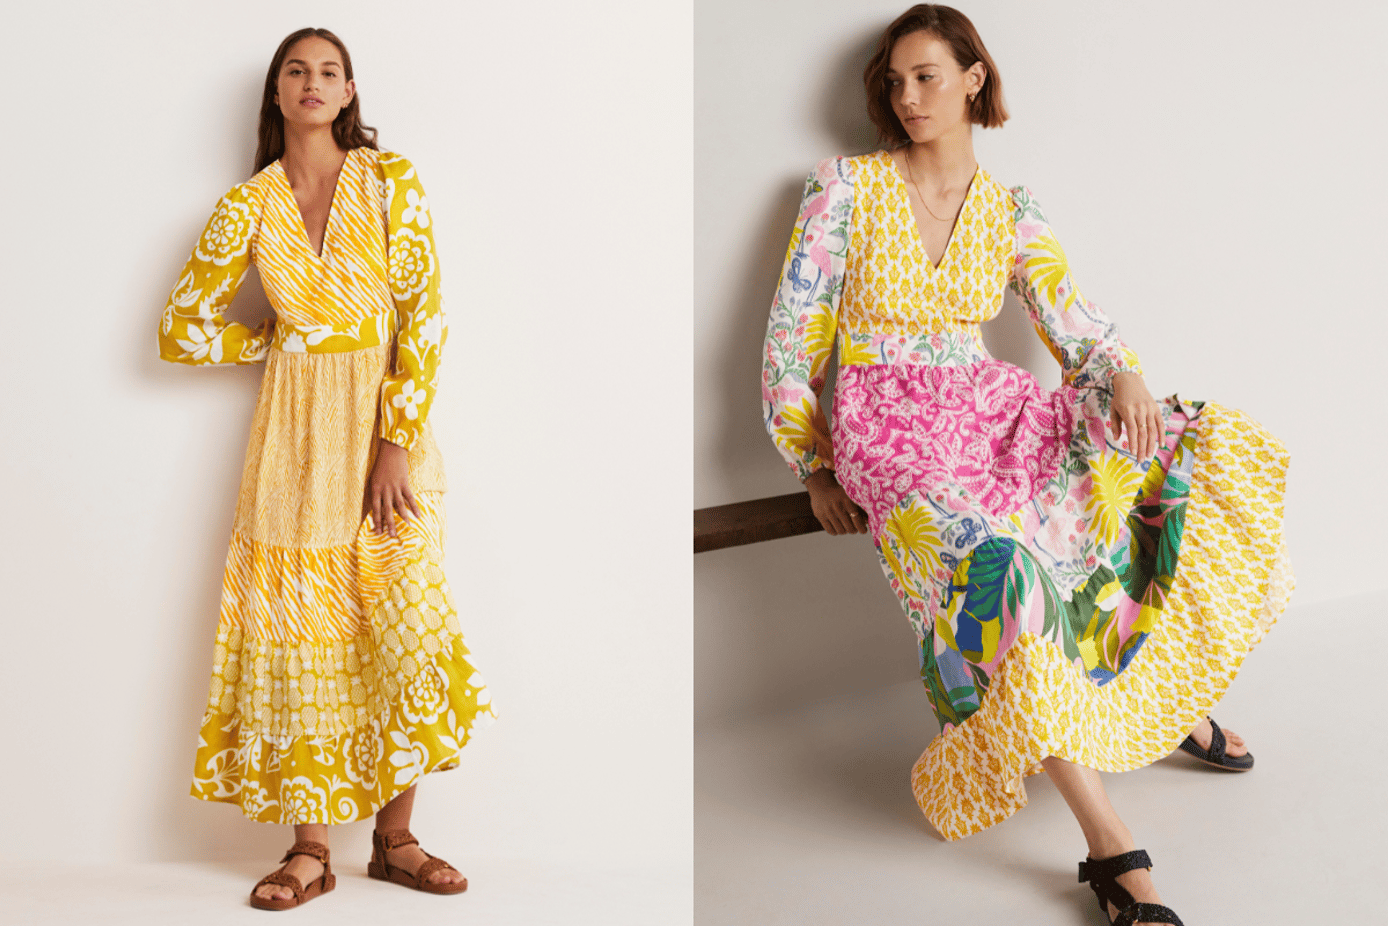 Boden launches sustainable 'Remix Edit'